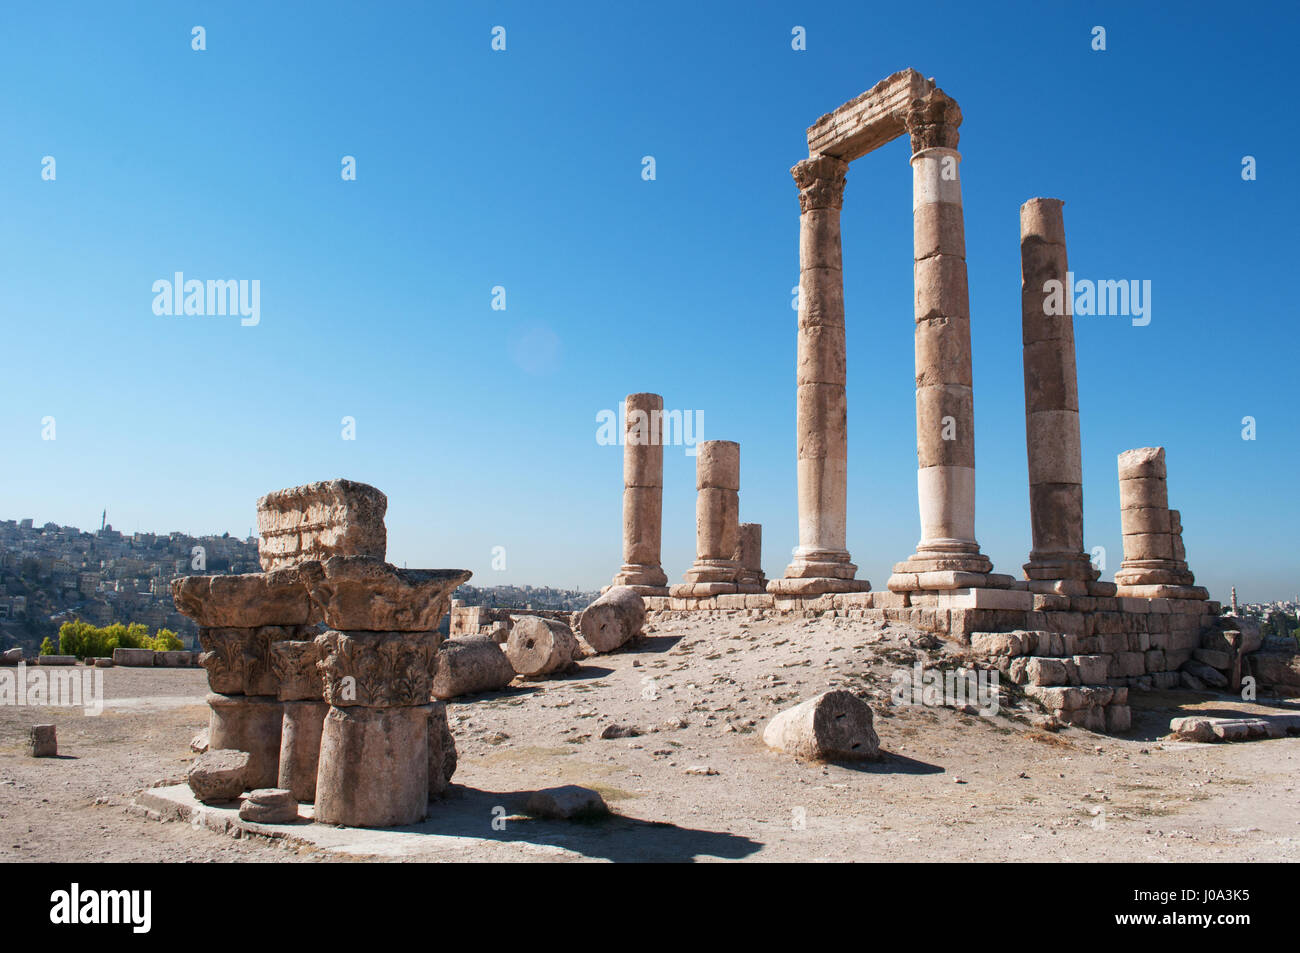 The ruins of the Temple of Hercules, the most significant Roman structure in the Amman Citadel, archaeological site, one of the city's original nucleus Stock Photo